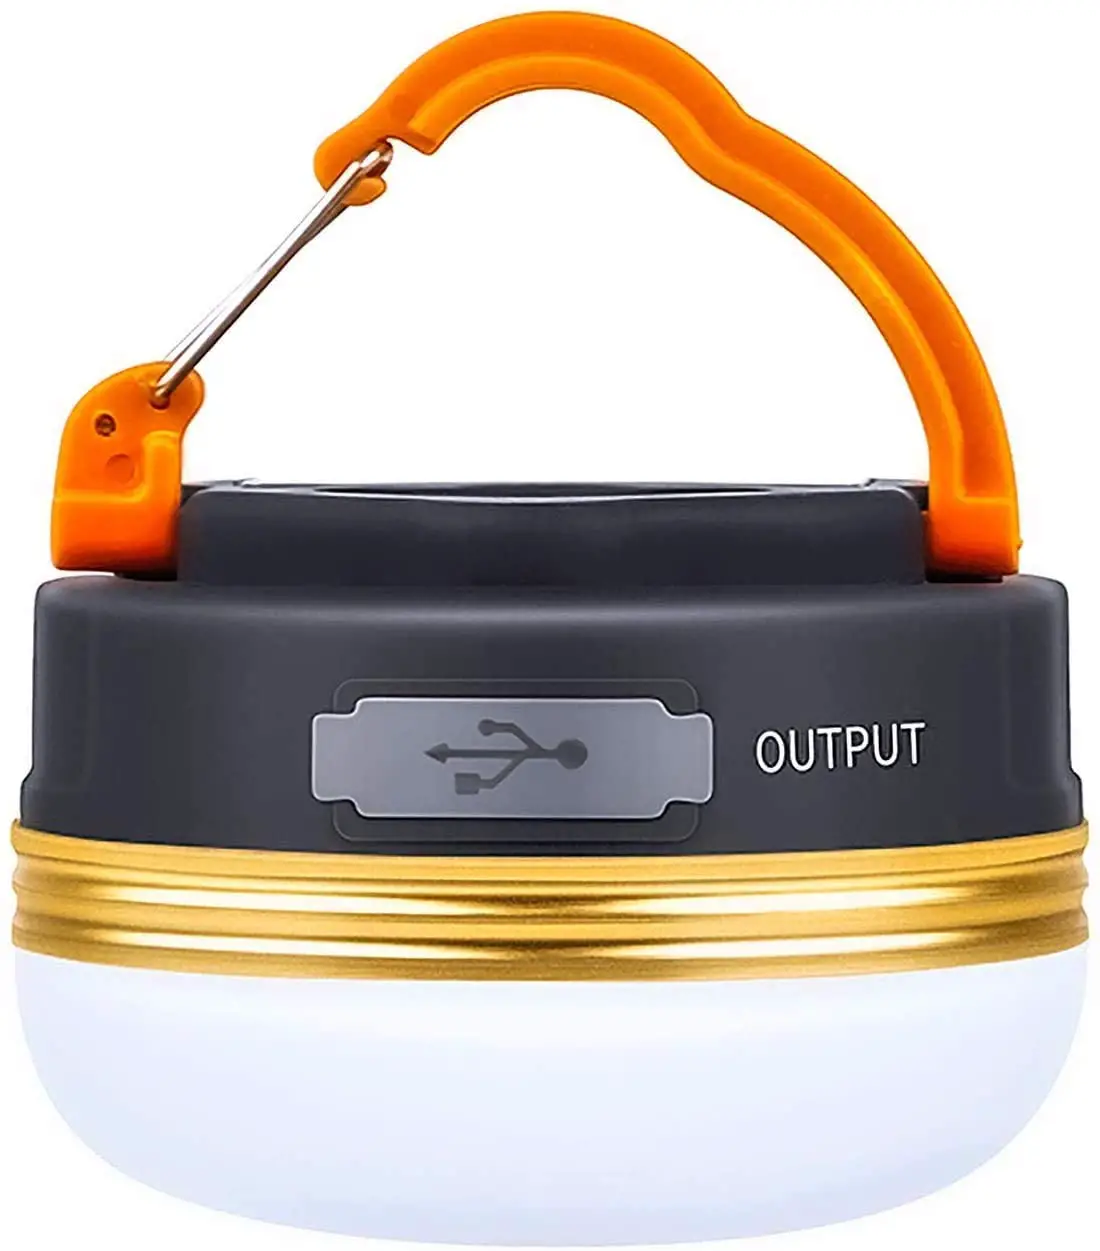 LED Camping Lantern Rechargeable & Portable Tent Light